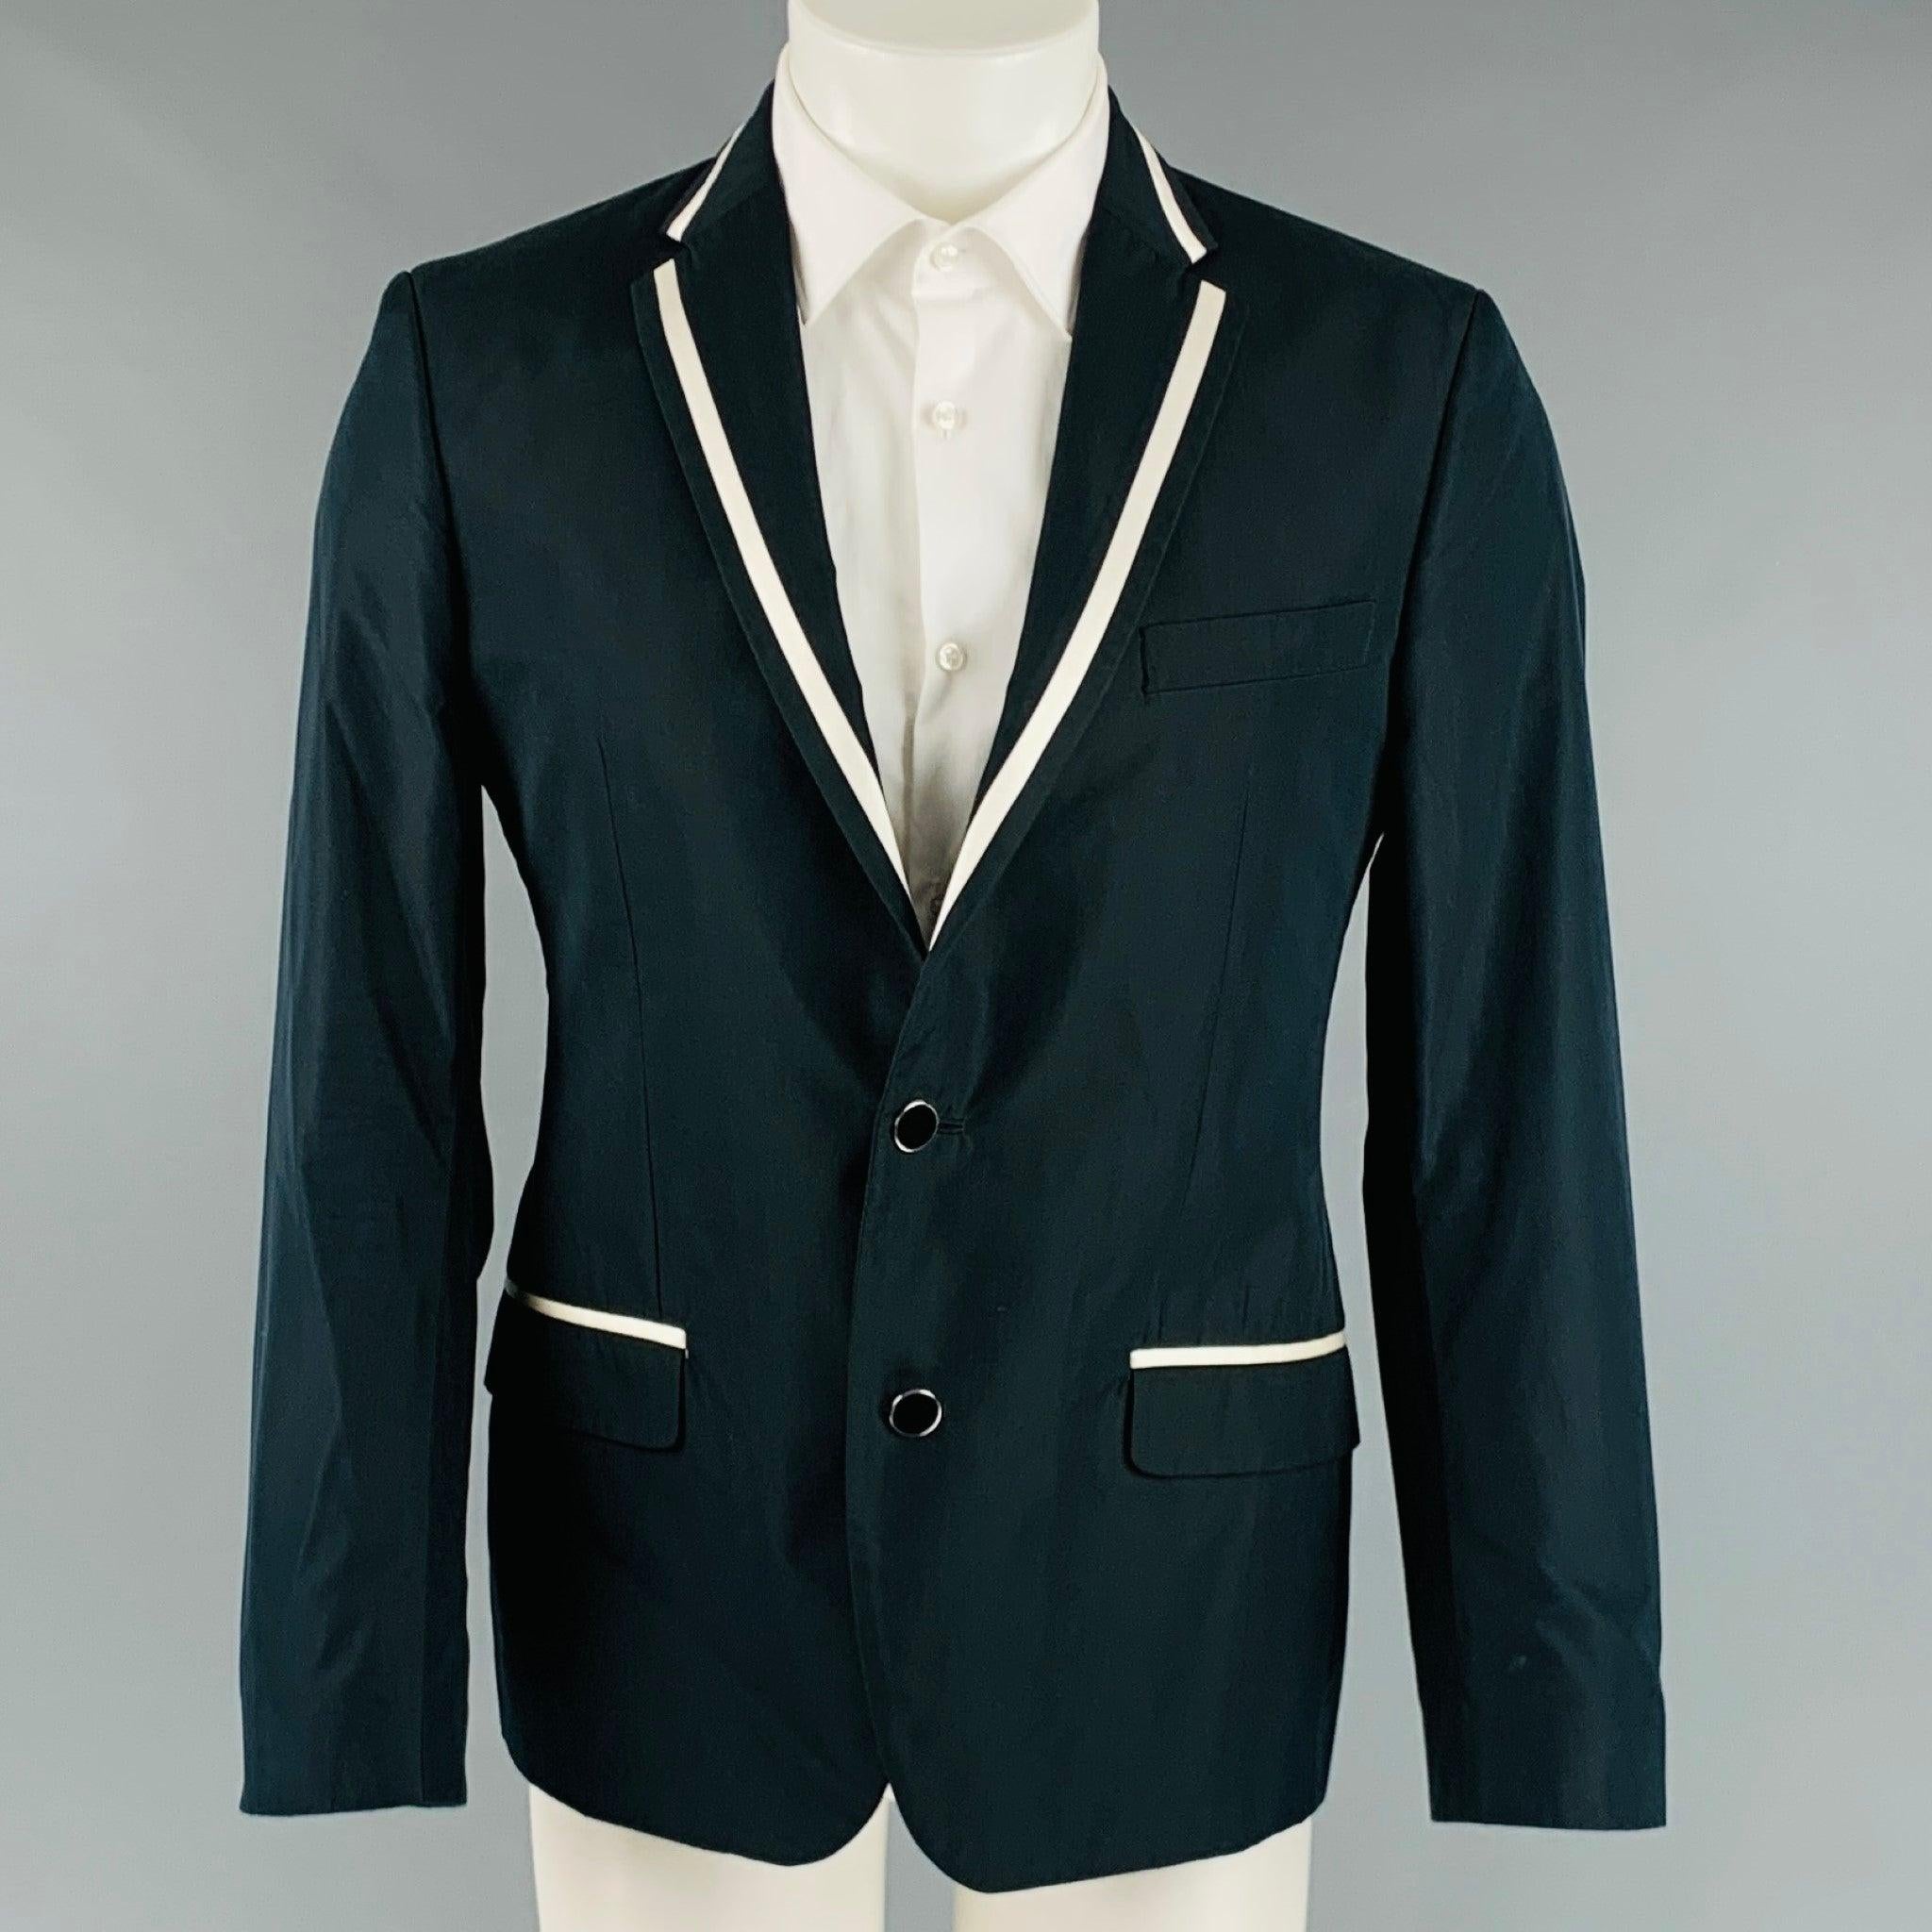 D&G by DOLCE & GABBANA sport coat comes in a black and white cotton blend woven with a full liner featuring a notch lapel, flap pockets, and a double button closure. Made in Italy.Excellent Pre-Owned Condition. 

Marked:   50 

Measurements: 
